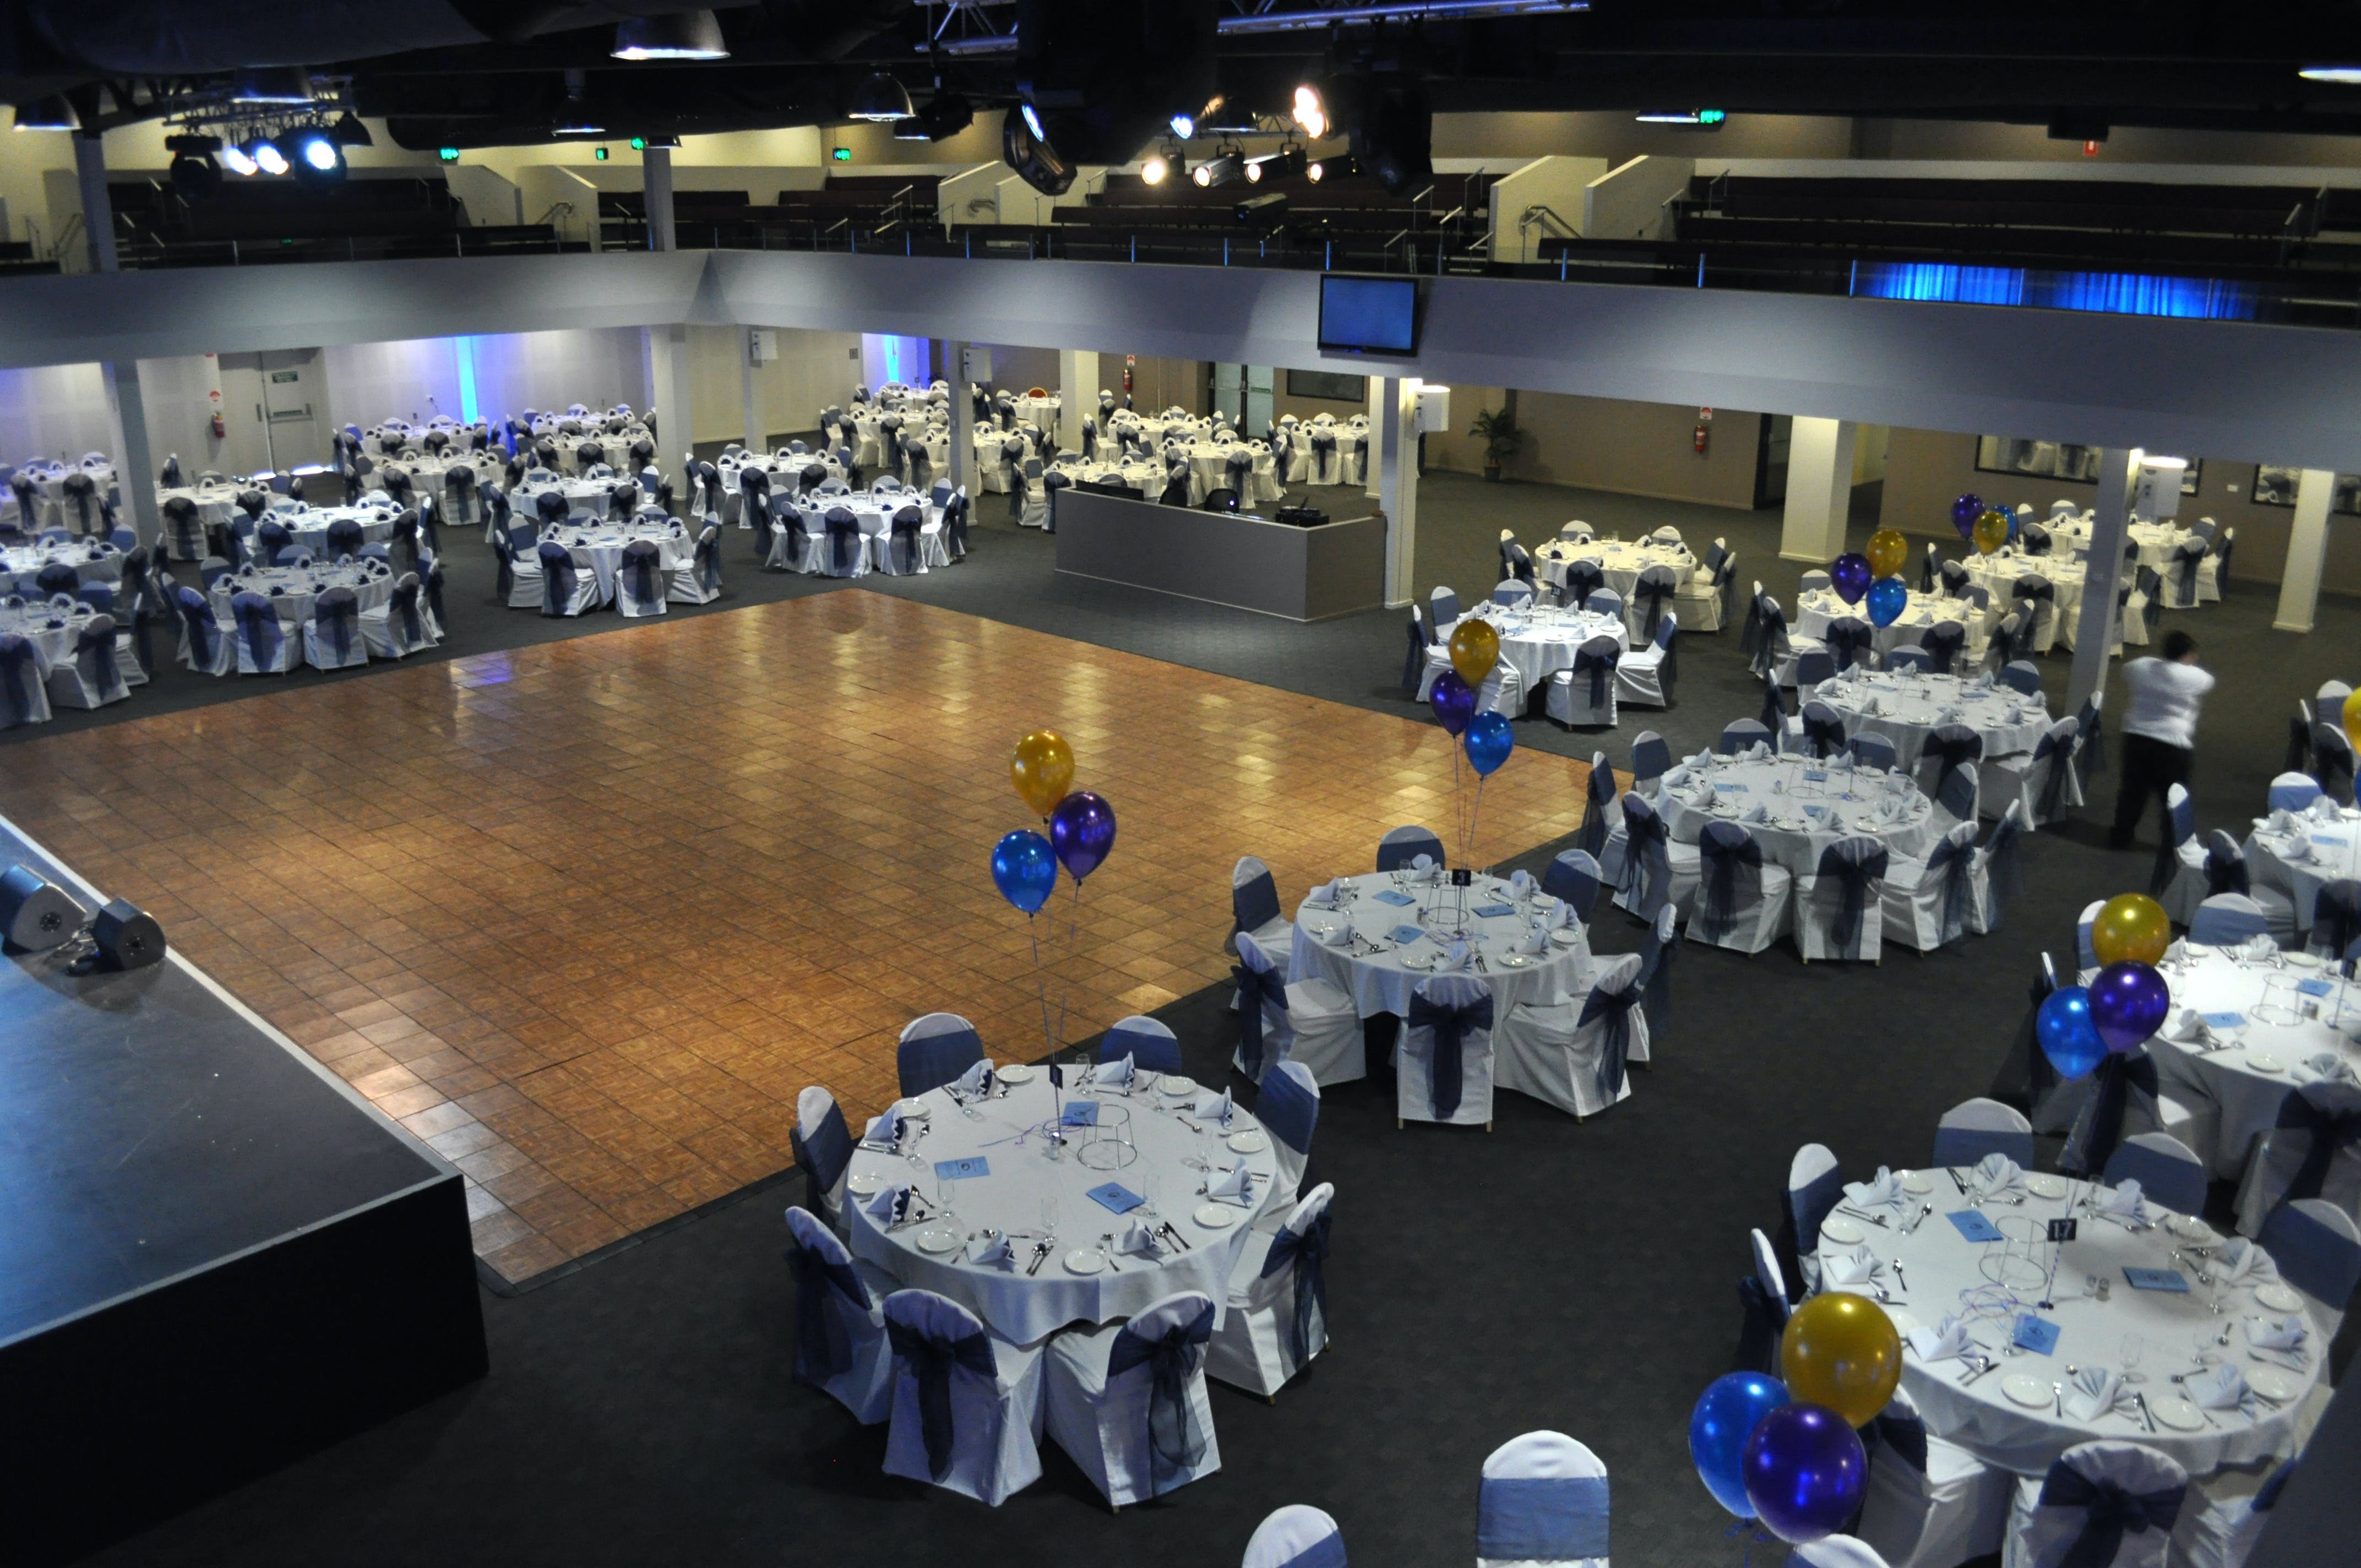 The New Peninsula Conference and Events Centre